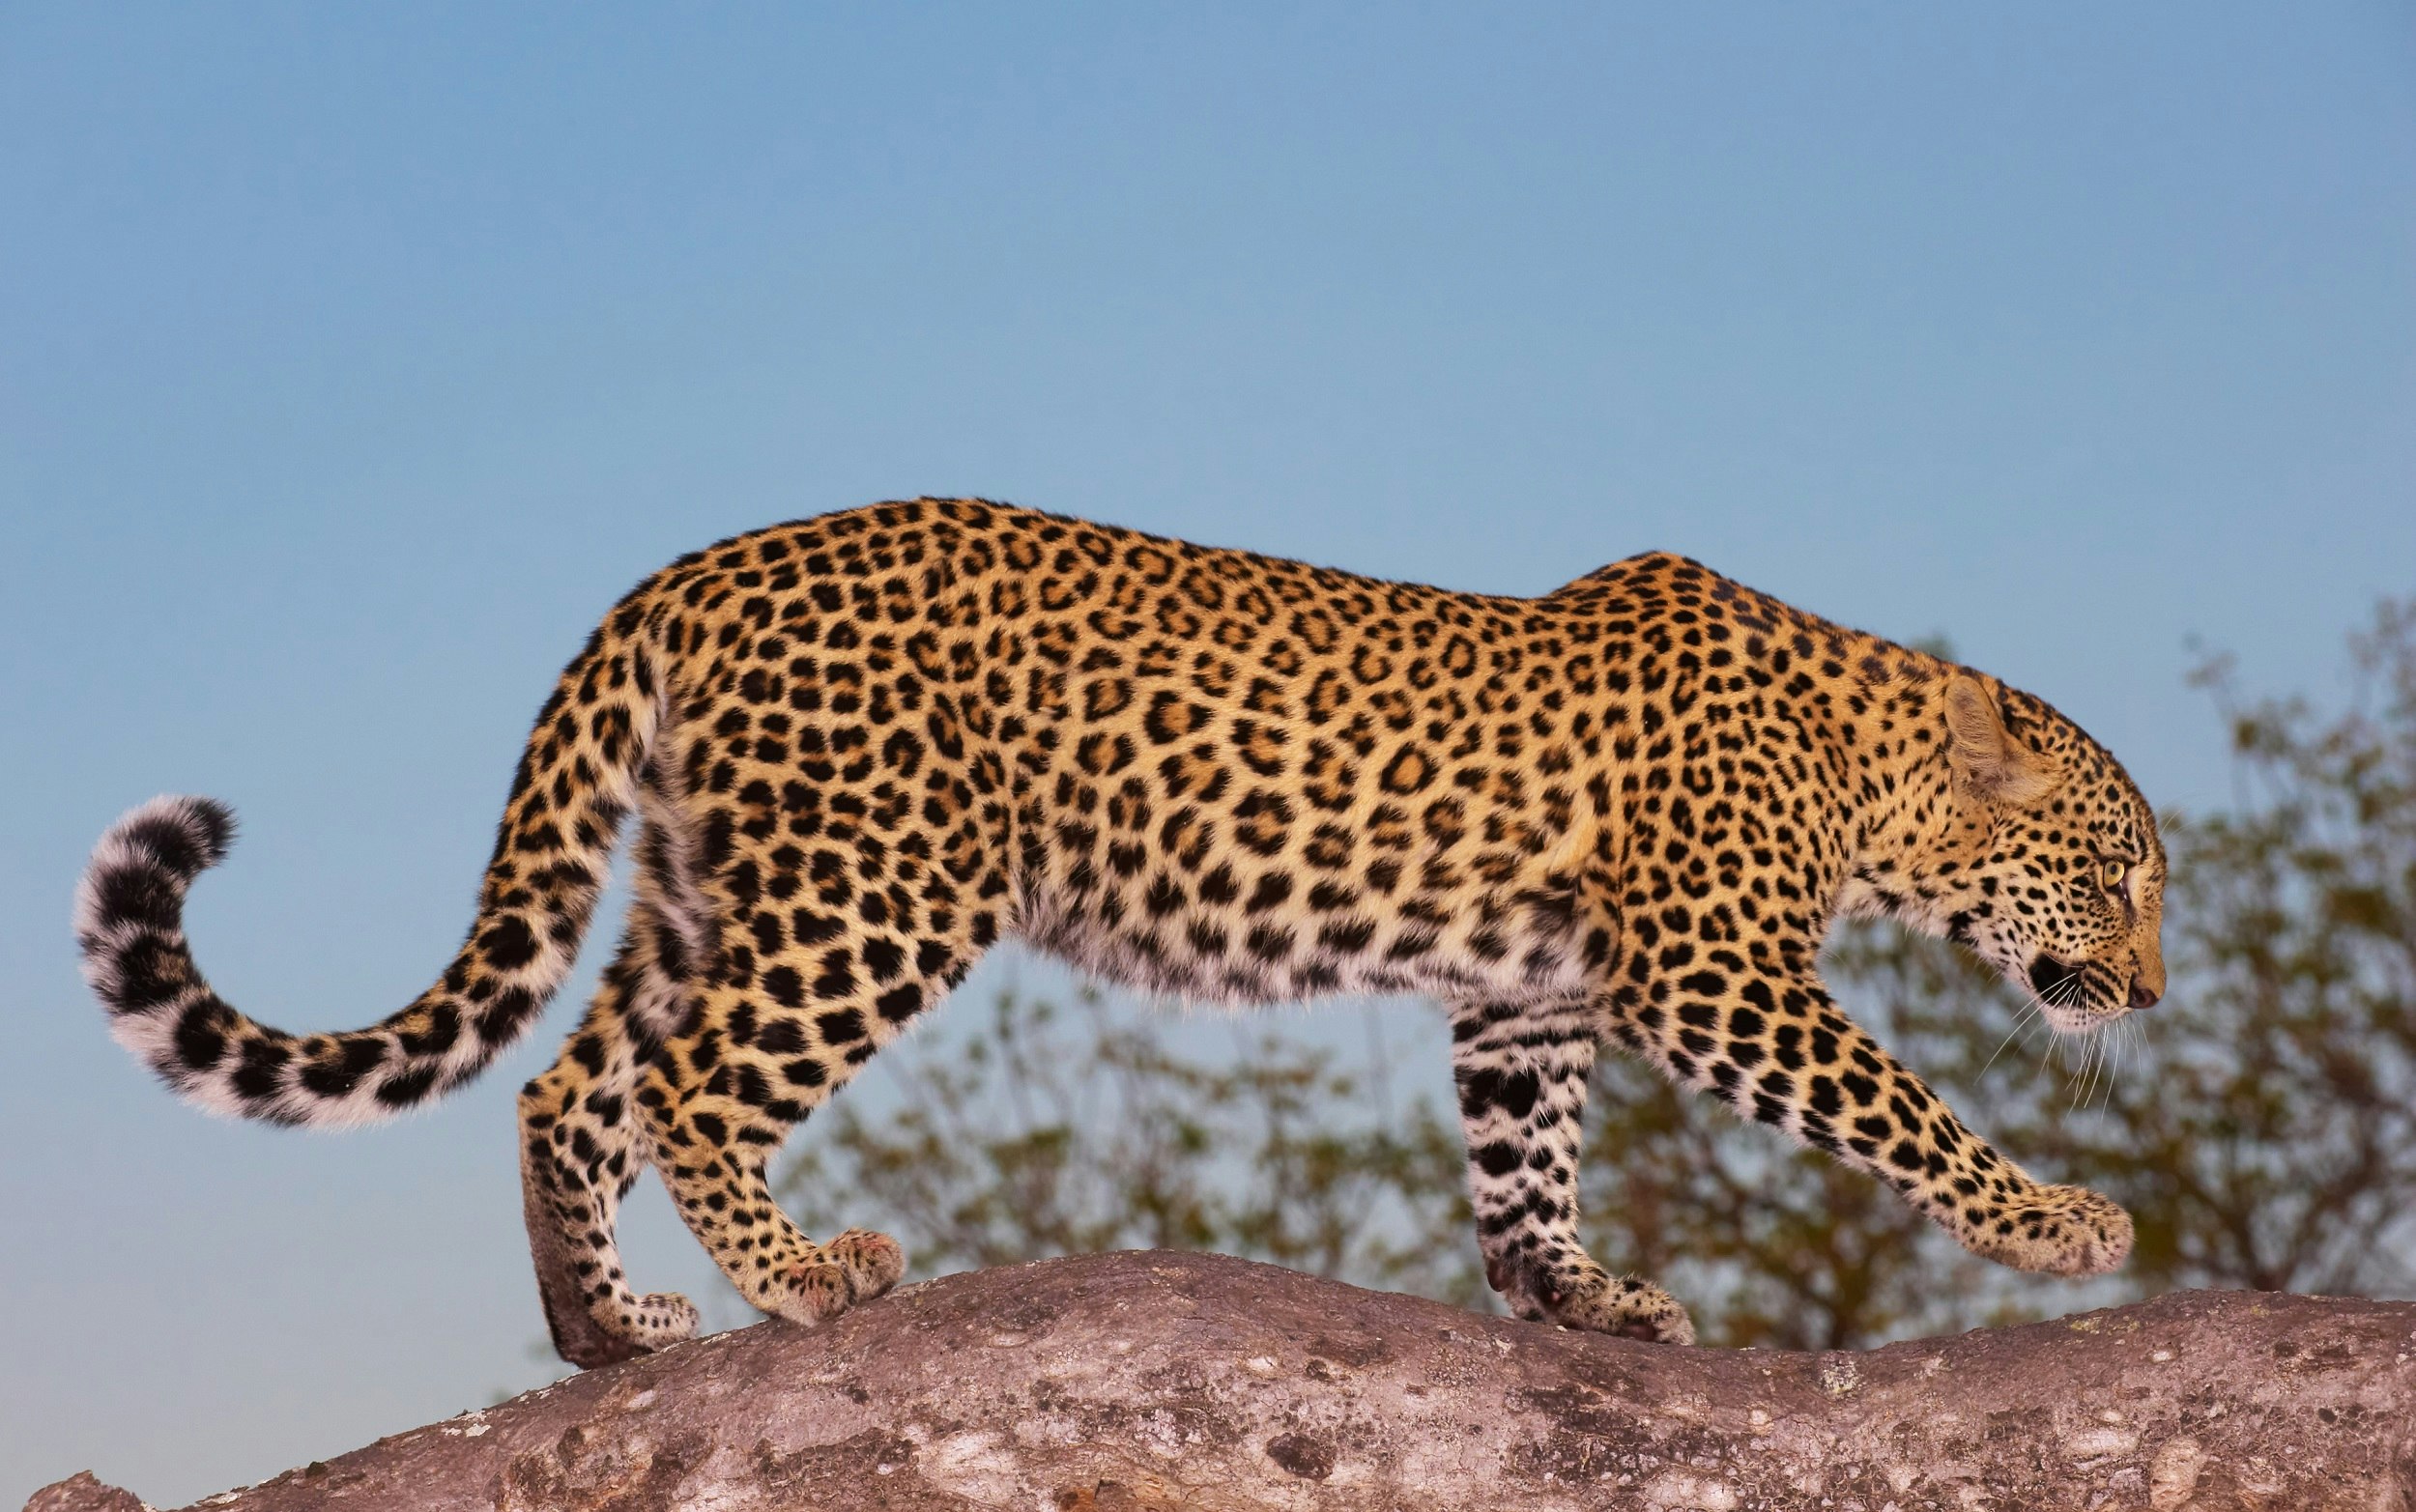 A beautiful leopard walks across the top of a huge tree branch; the background is a clear blue sky.